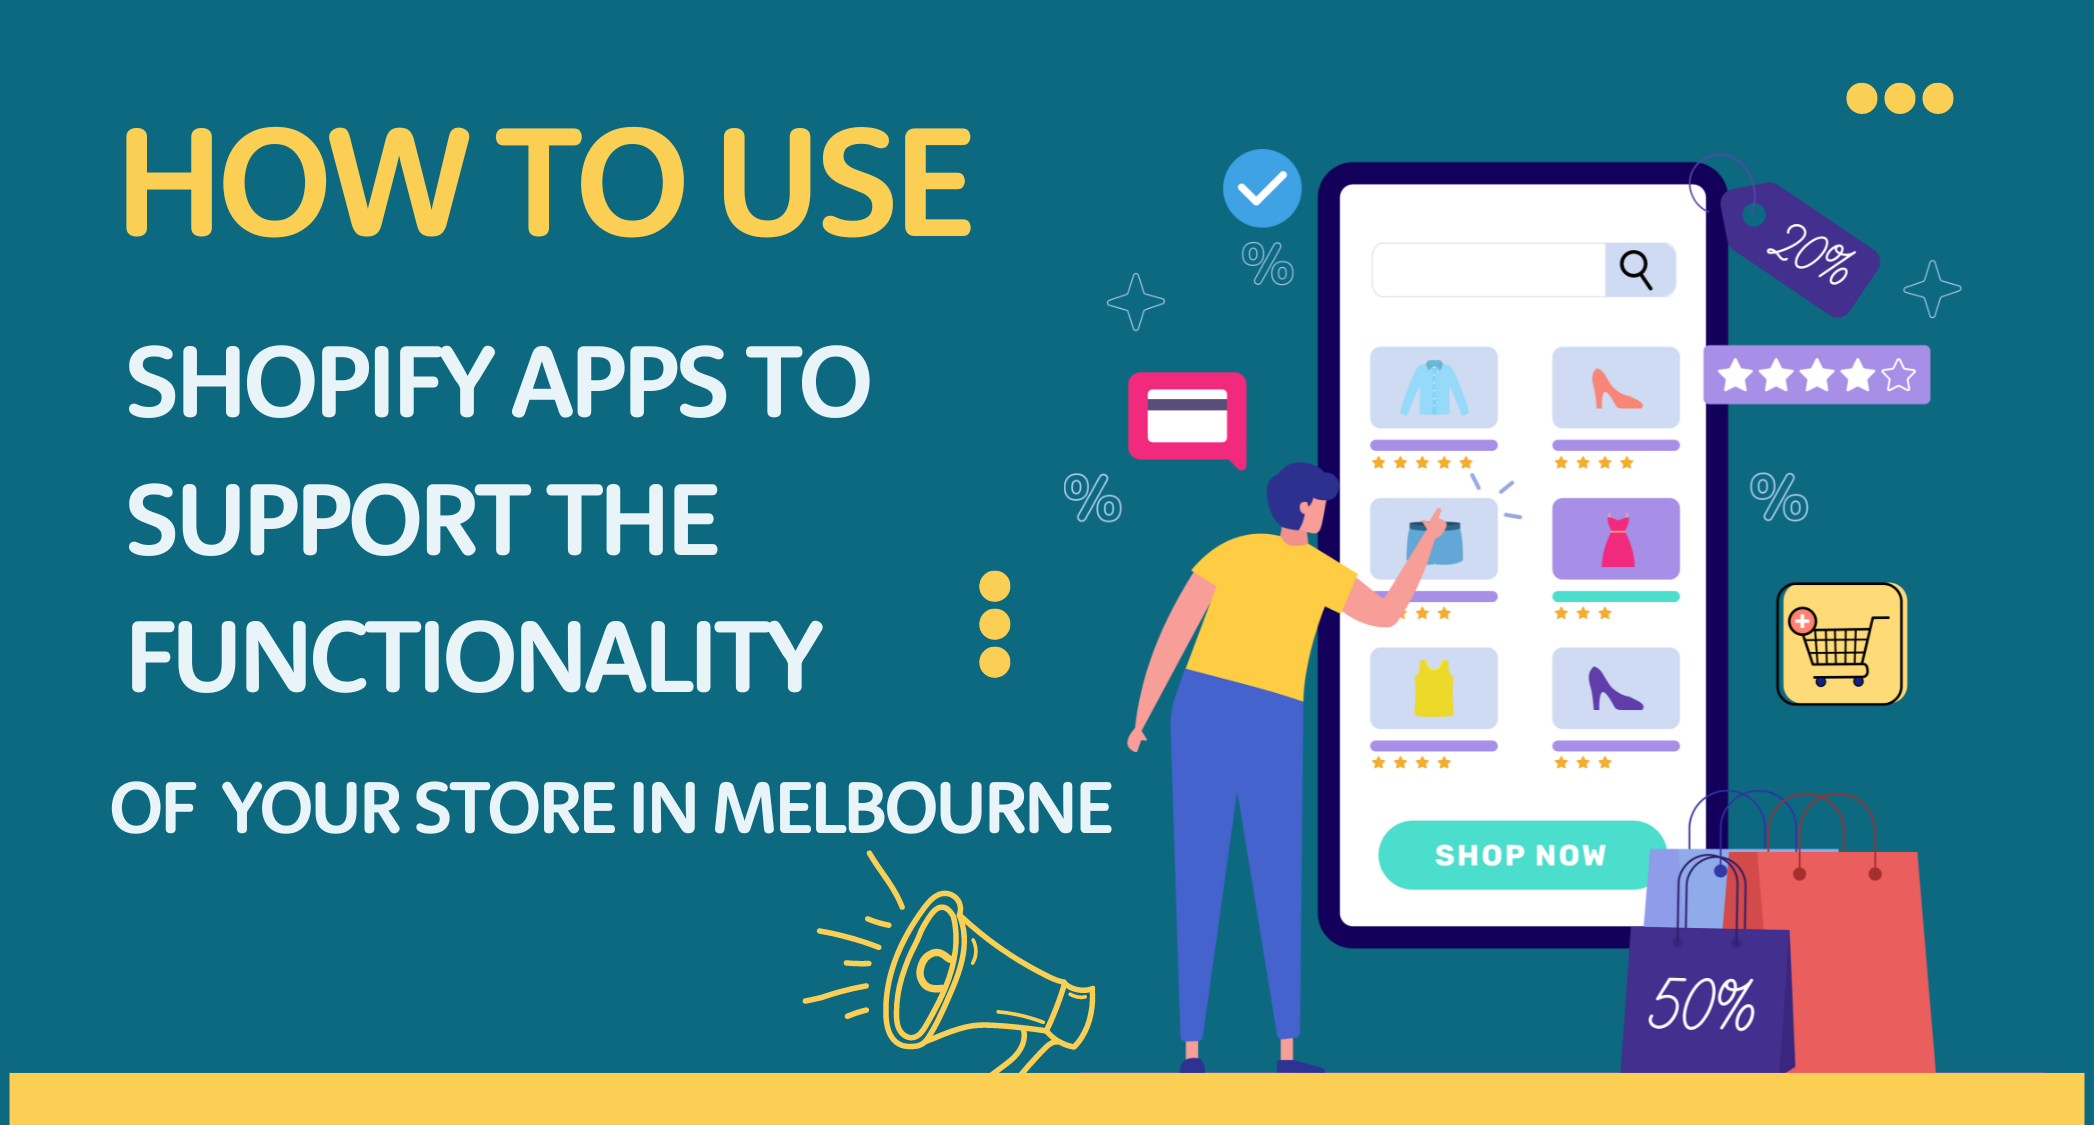 How to use Shopify apps to support the functionality of your store in Melbourne